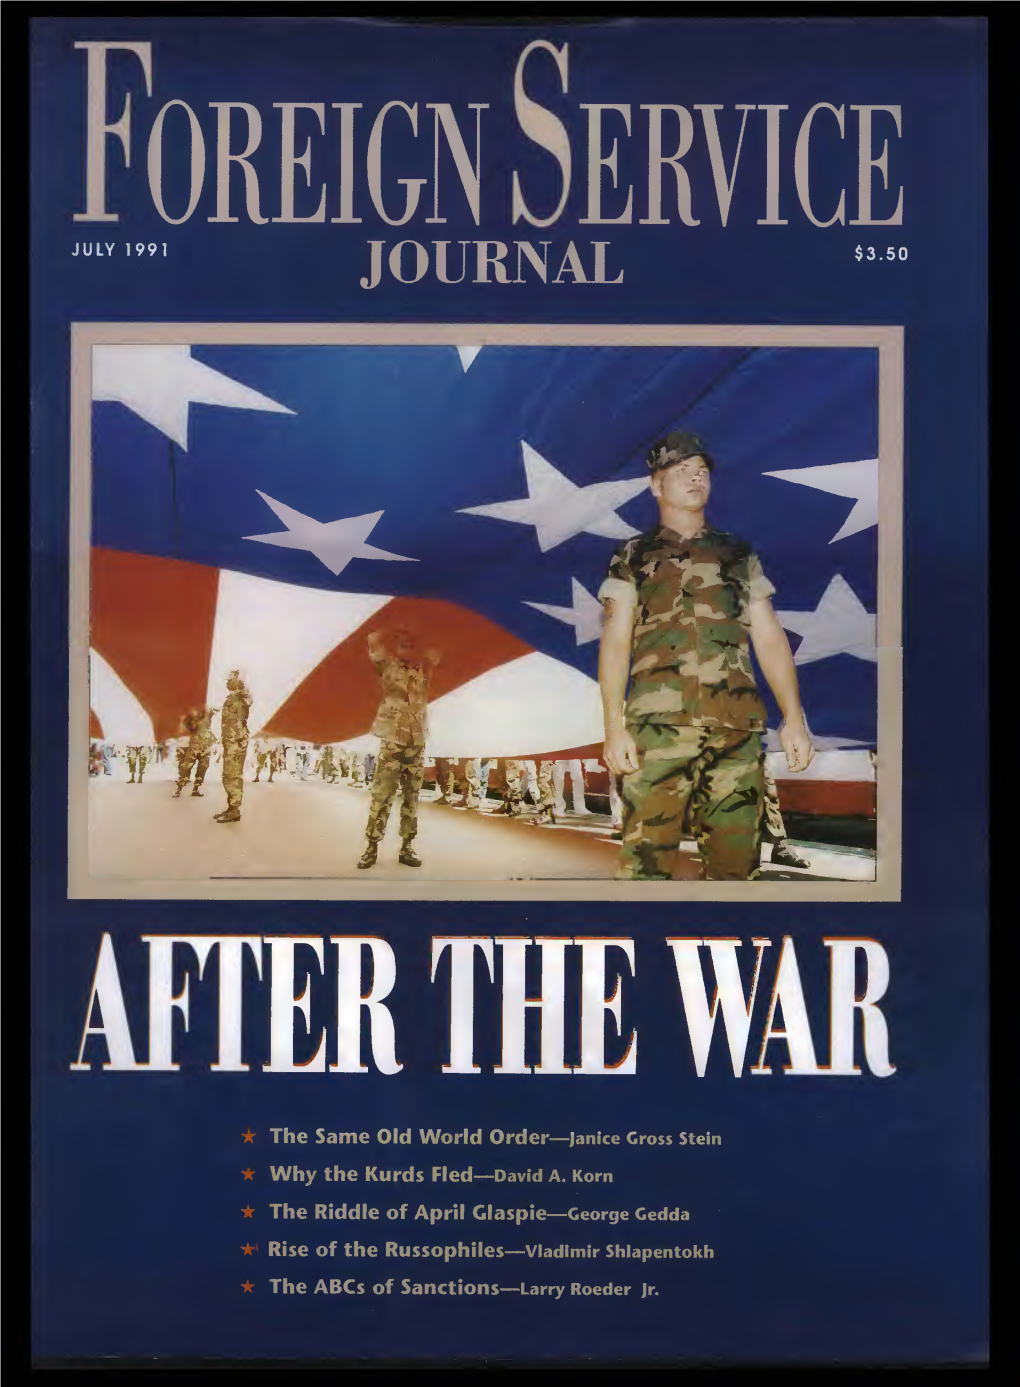 The Foreign Service Journal, July 1991